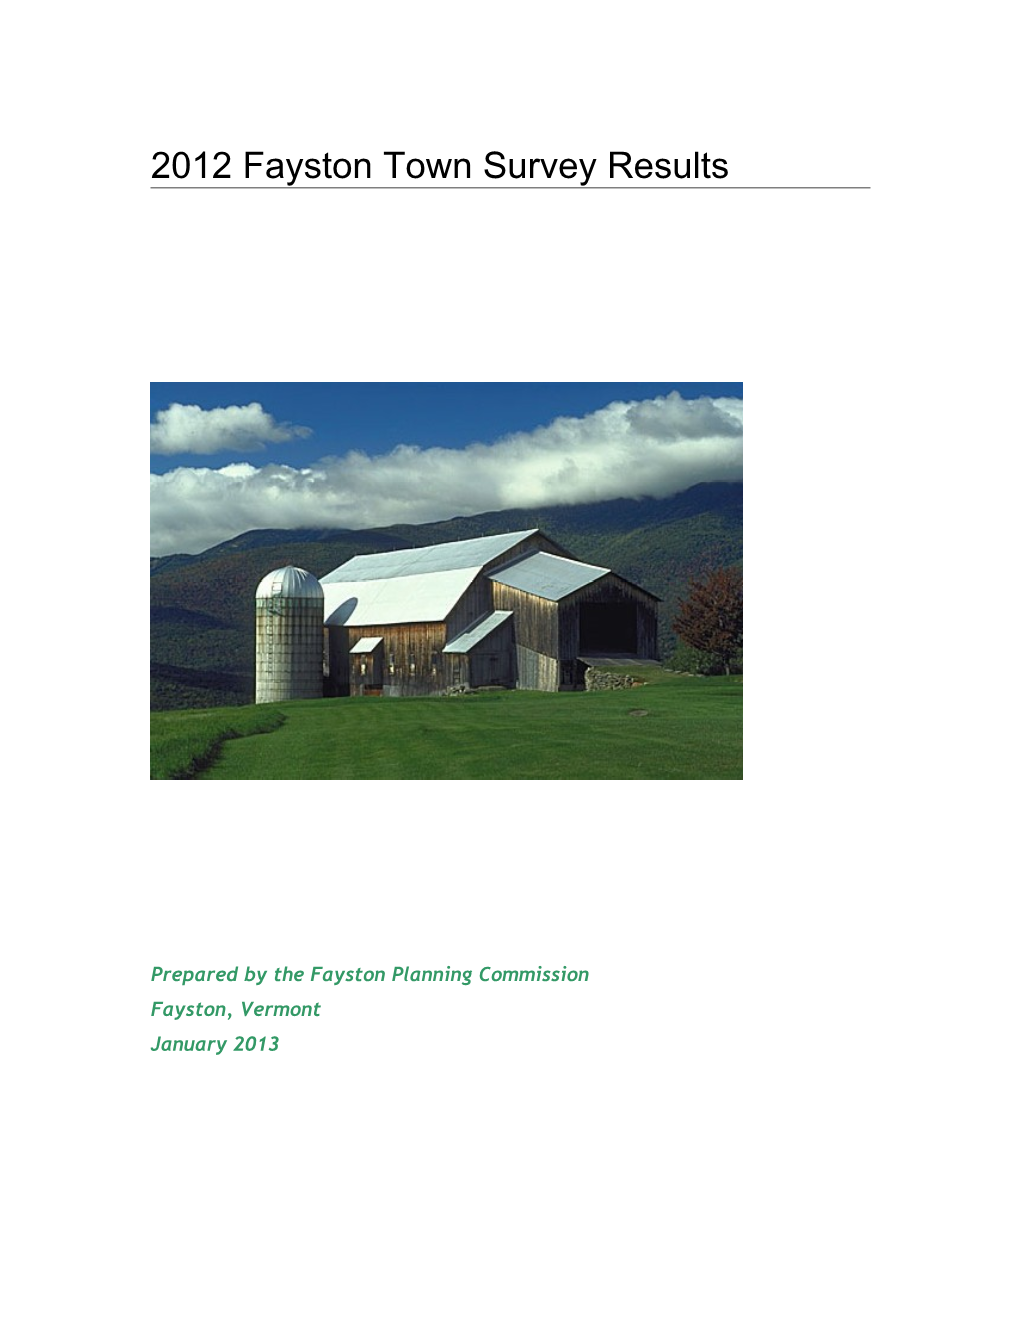 2006 Fayston Town Survey Results